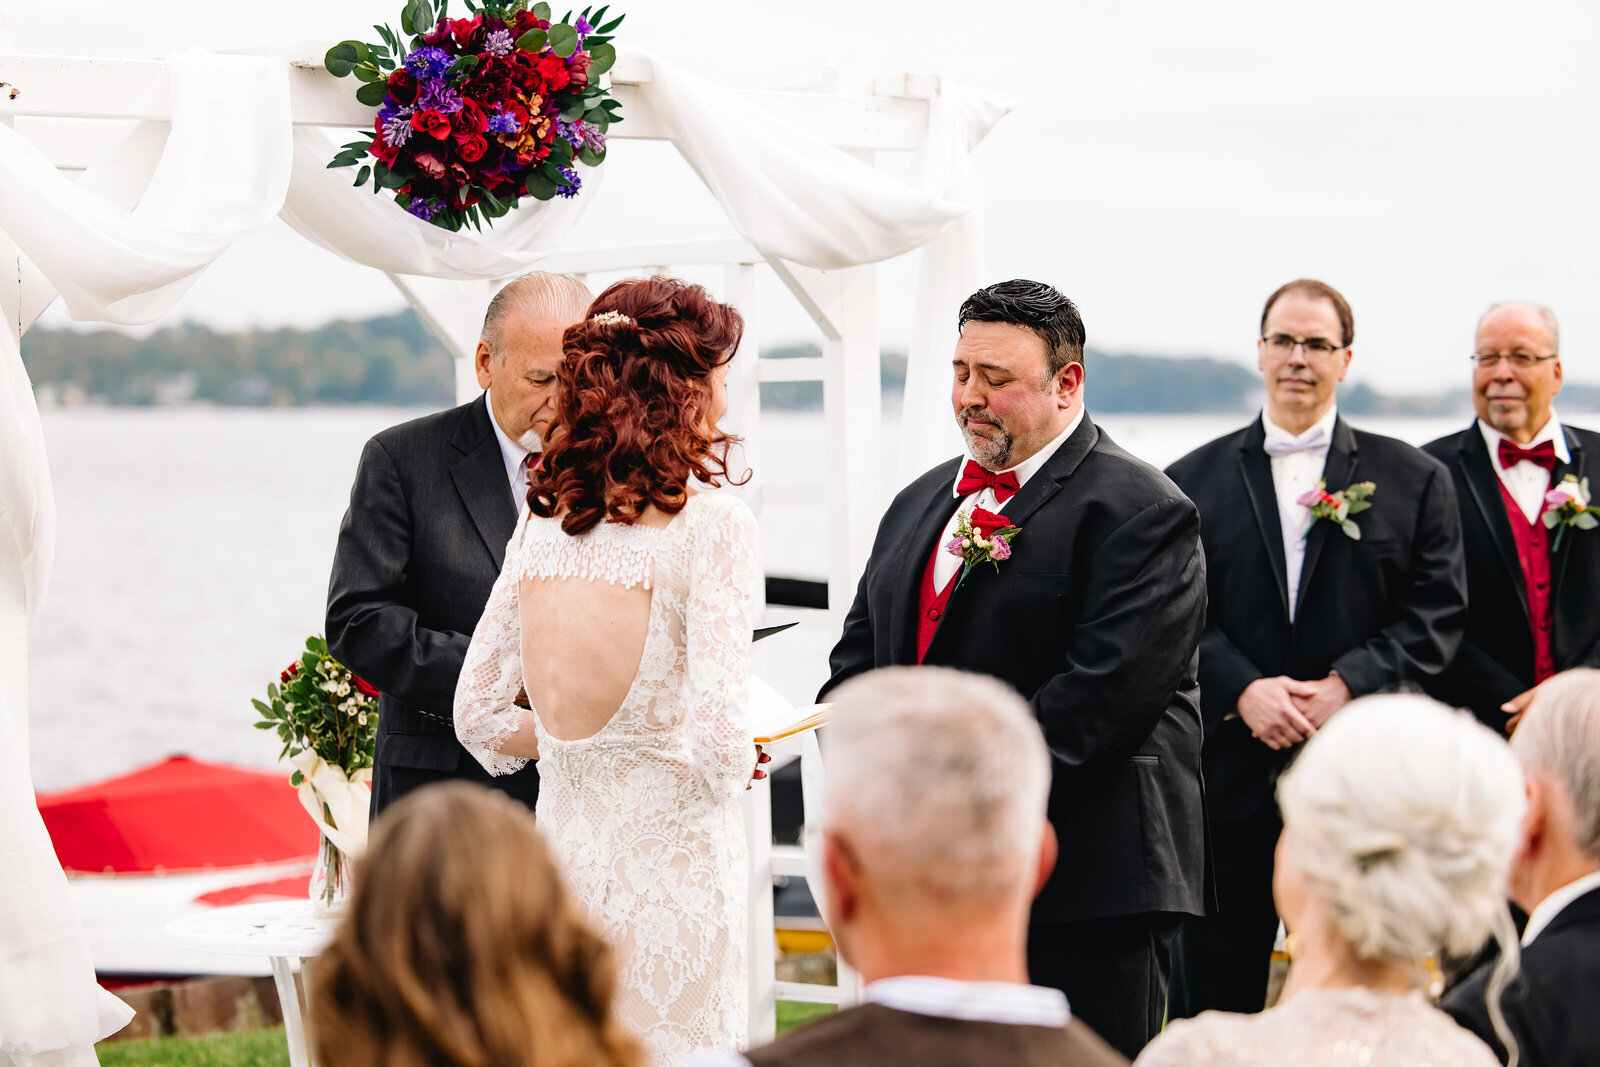 Groom sheds a tear while listening to his new wife's beautiful vows to him